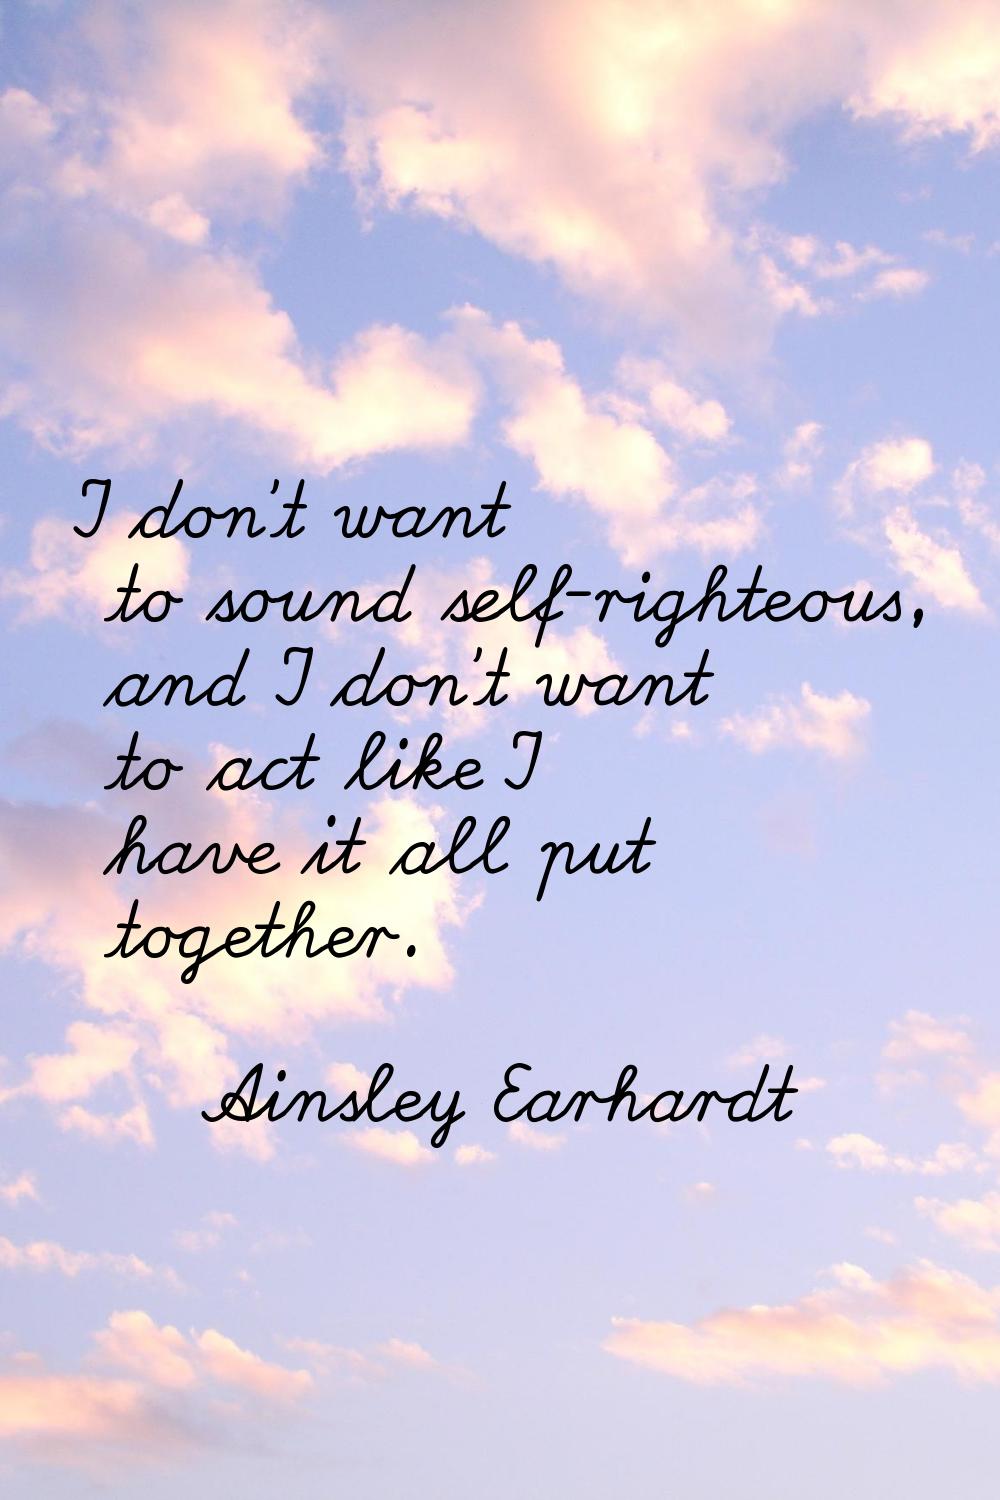 I don't want to sound self-righteous, and I don't want to act like I have it all put together.